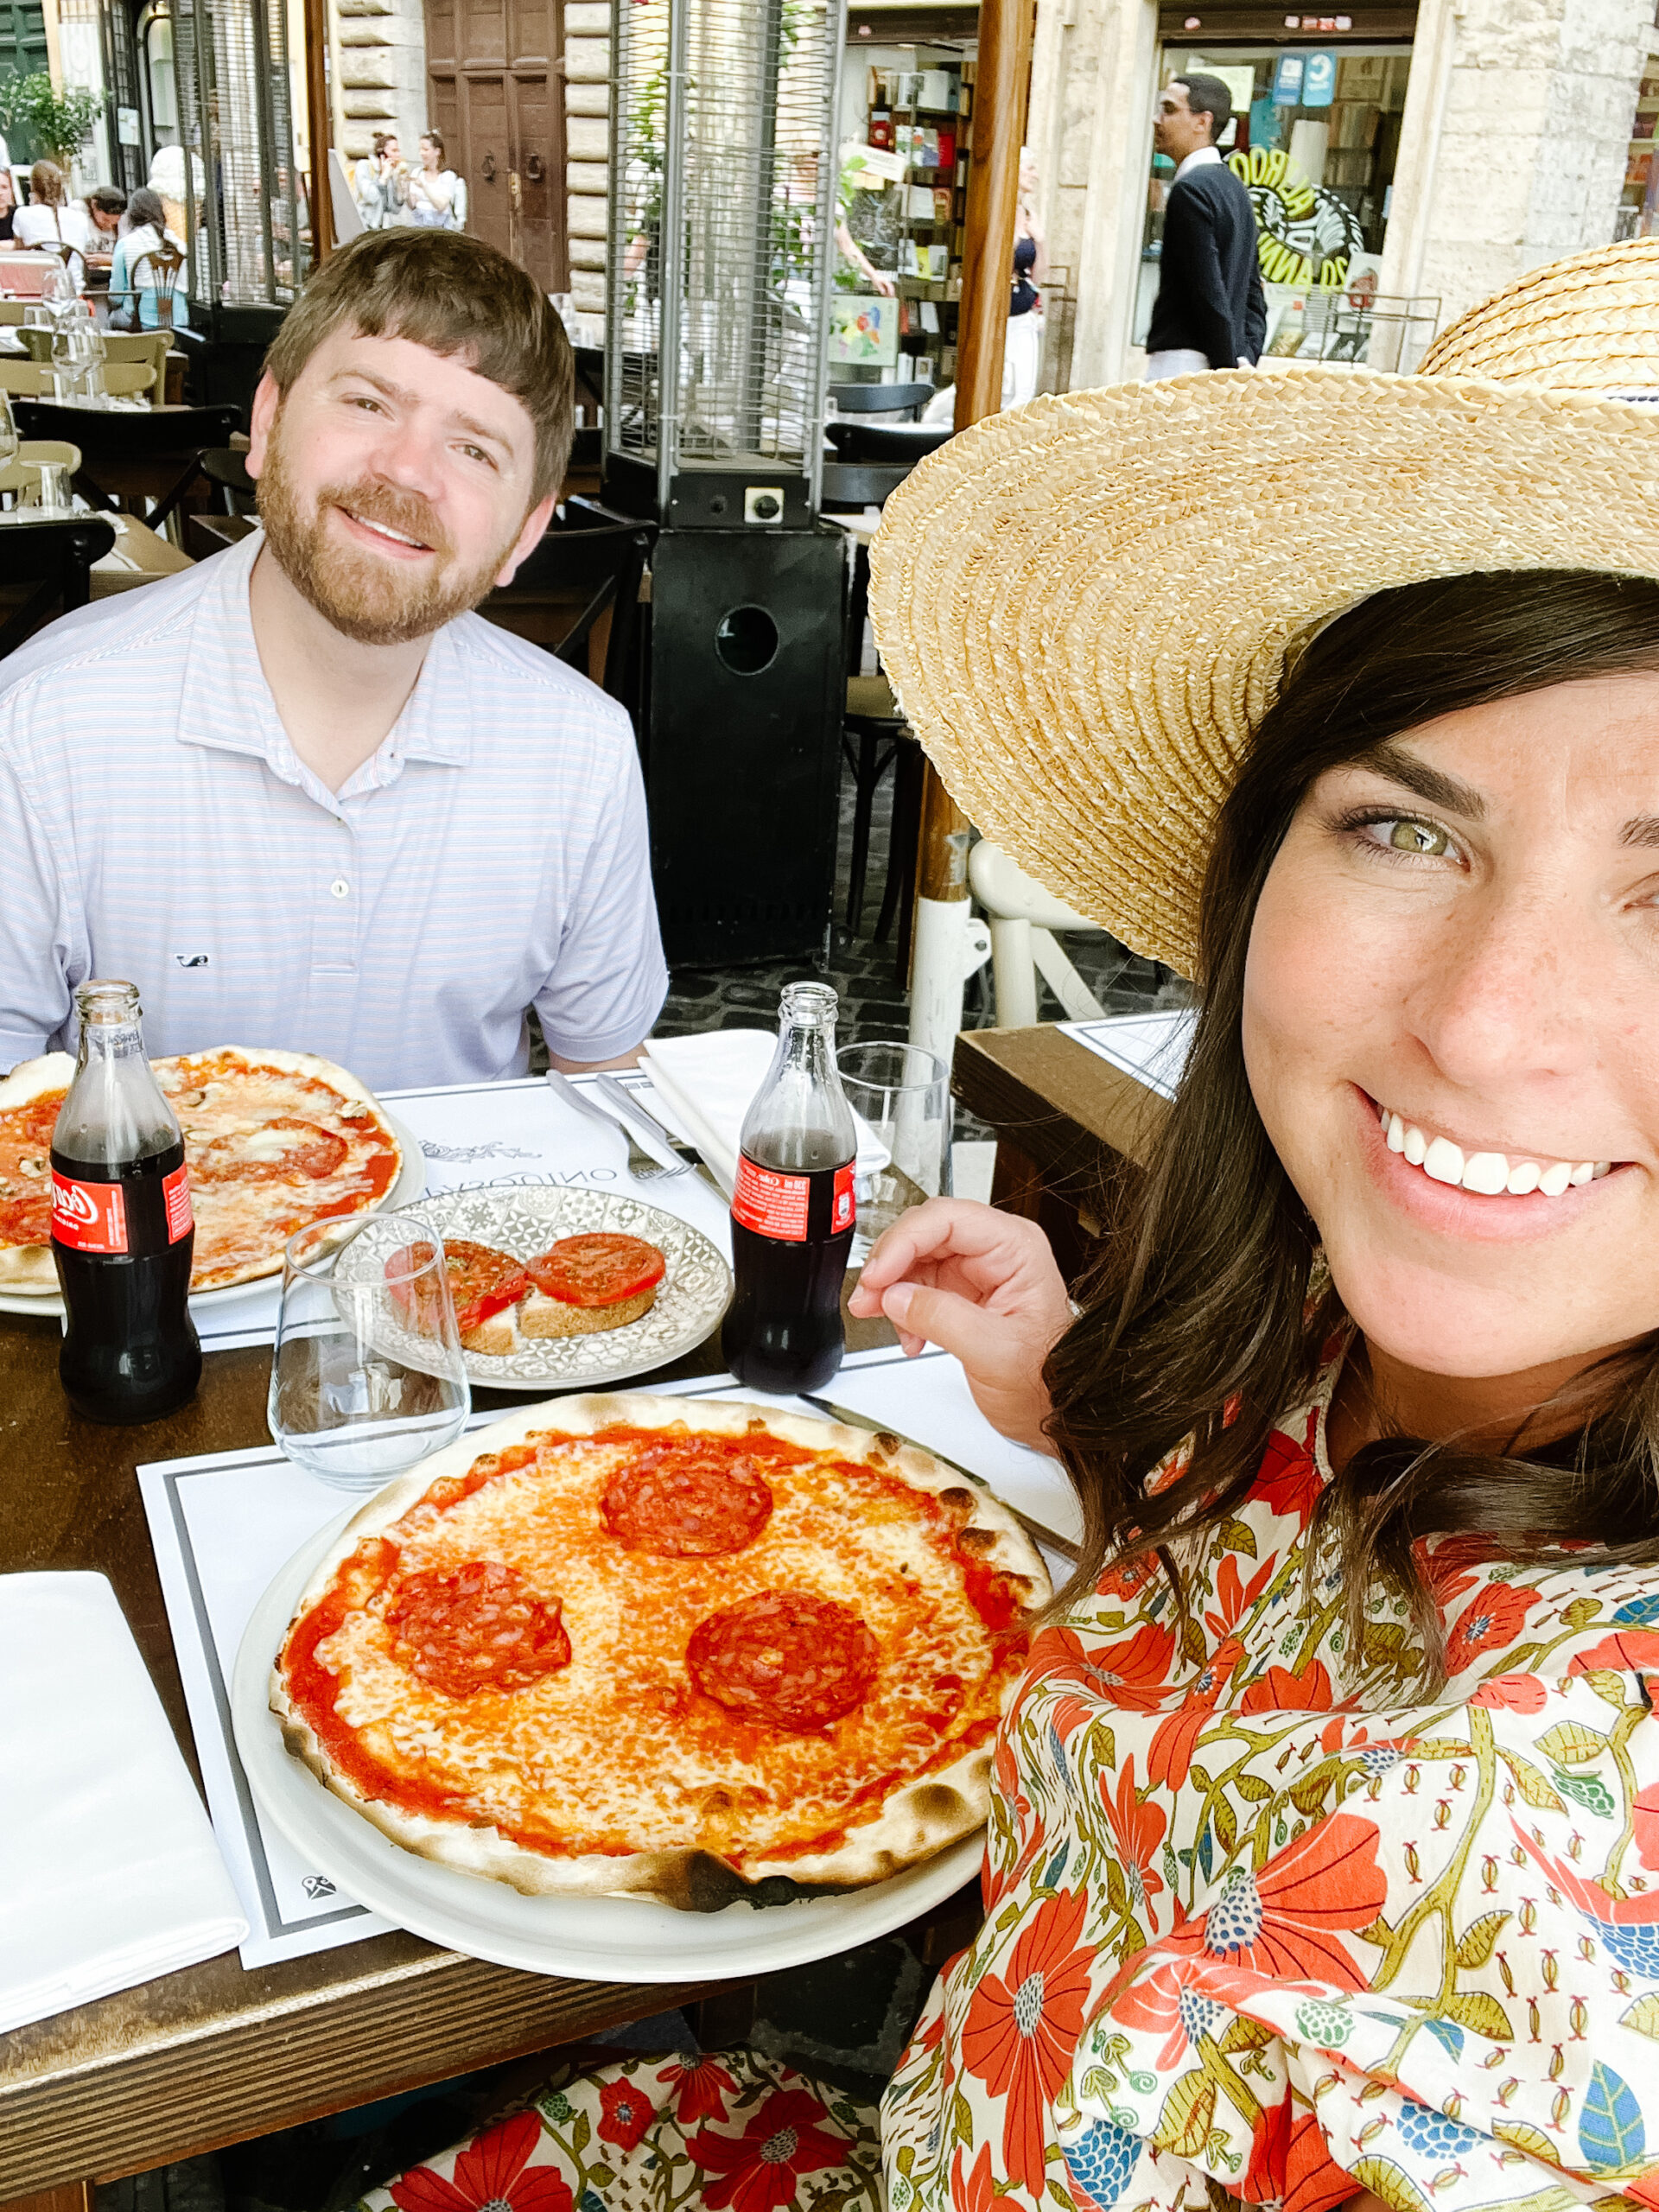 John and Brittney Naylor taking a selfie in Rome with their pizza after their pizza making class, 36 hours in Rome